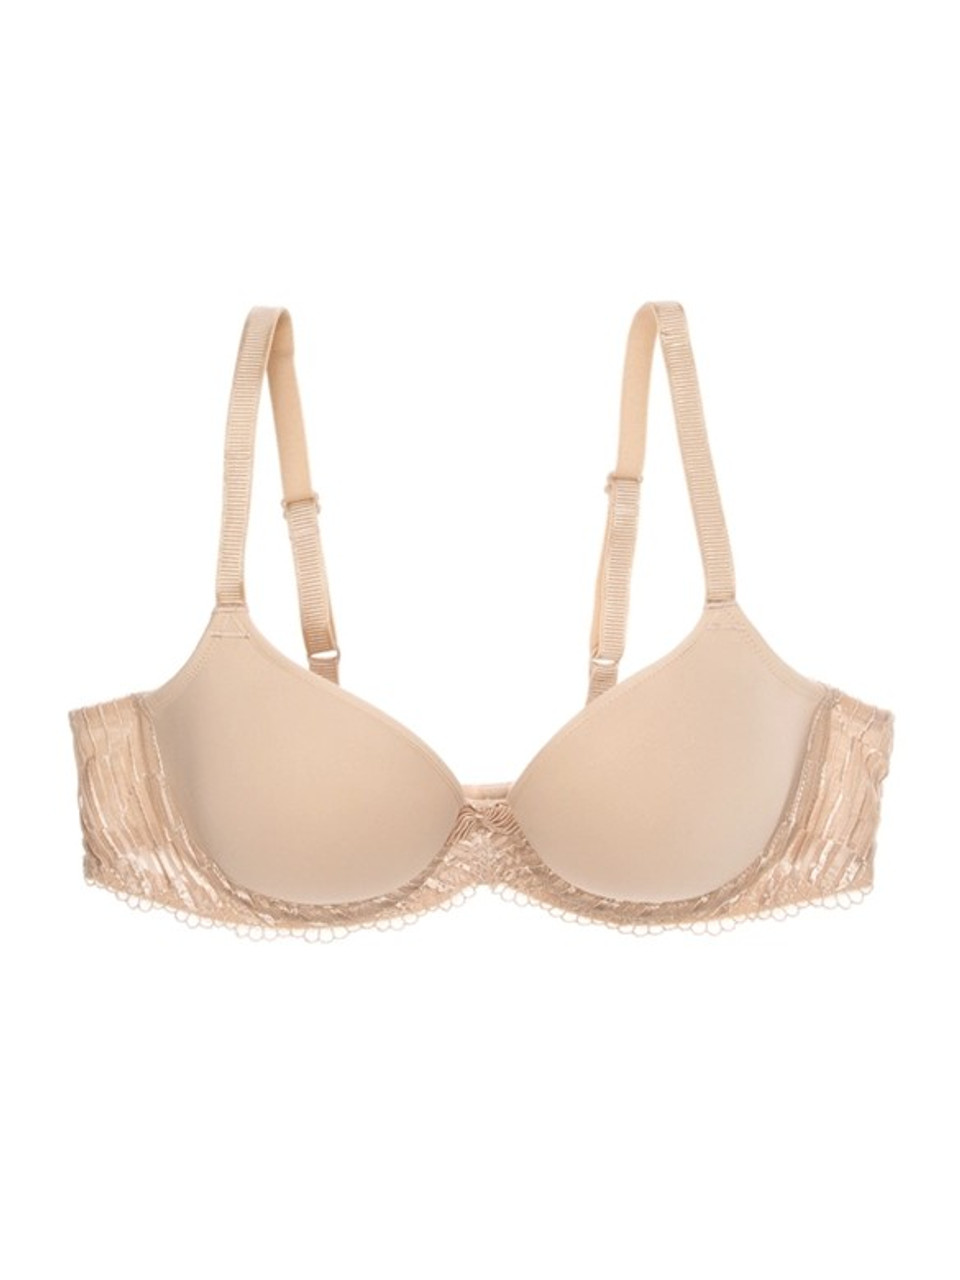 Wacoal La Femme Contour Bra SAND buy for the best price CAD$ 84.00 - Canada  and U.S. delivery – Bralissimo